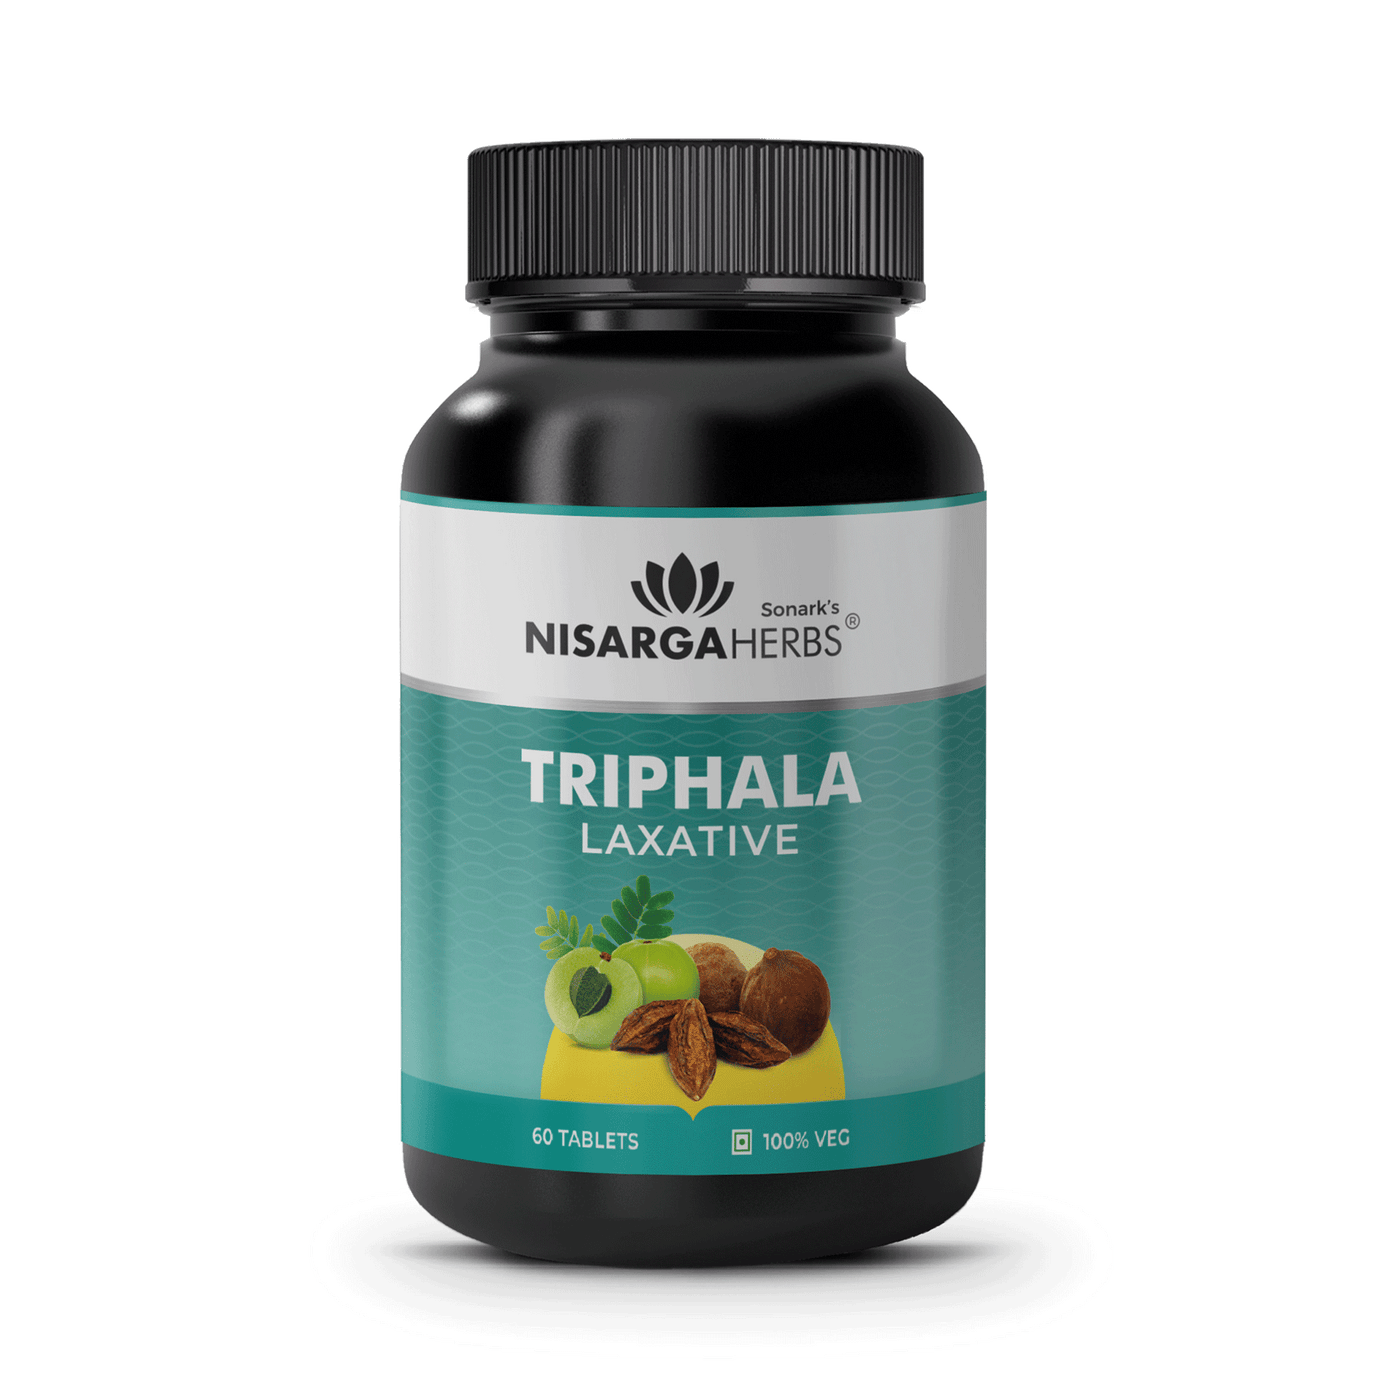 ayurvedic Tripahala tablet that provides the following benefits: Promotes a healthy gut, Boosts immunity, Helps control diabetes, Nourishes skin, Promotes healthy hair, Supports weight loss, Promotes eye health, Helps lower cholesterol. 